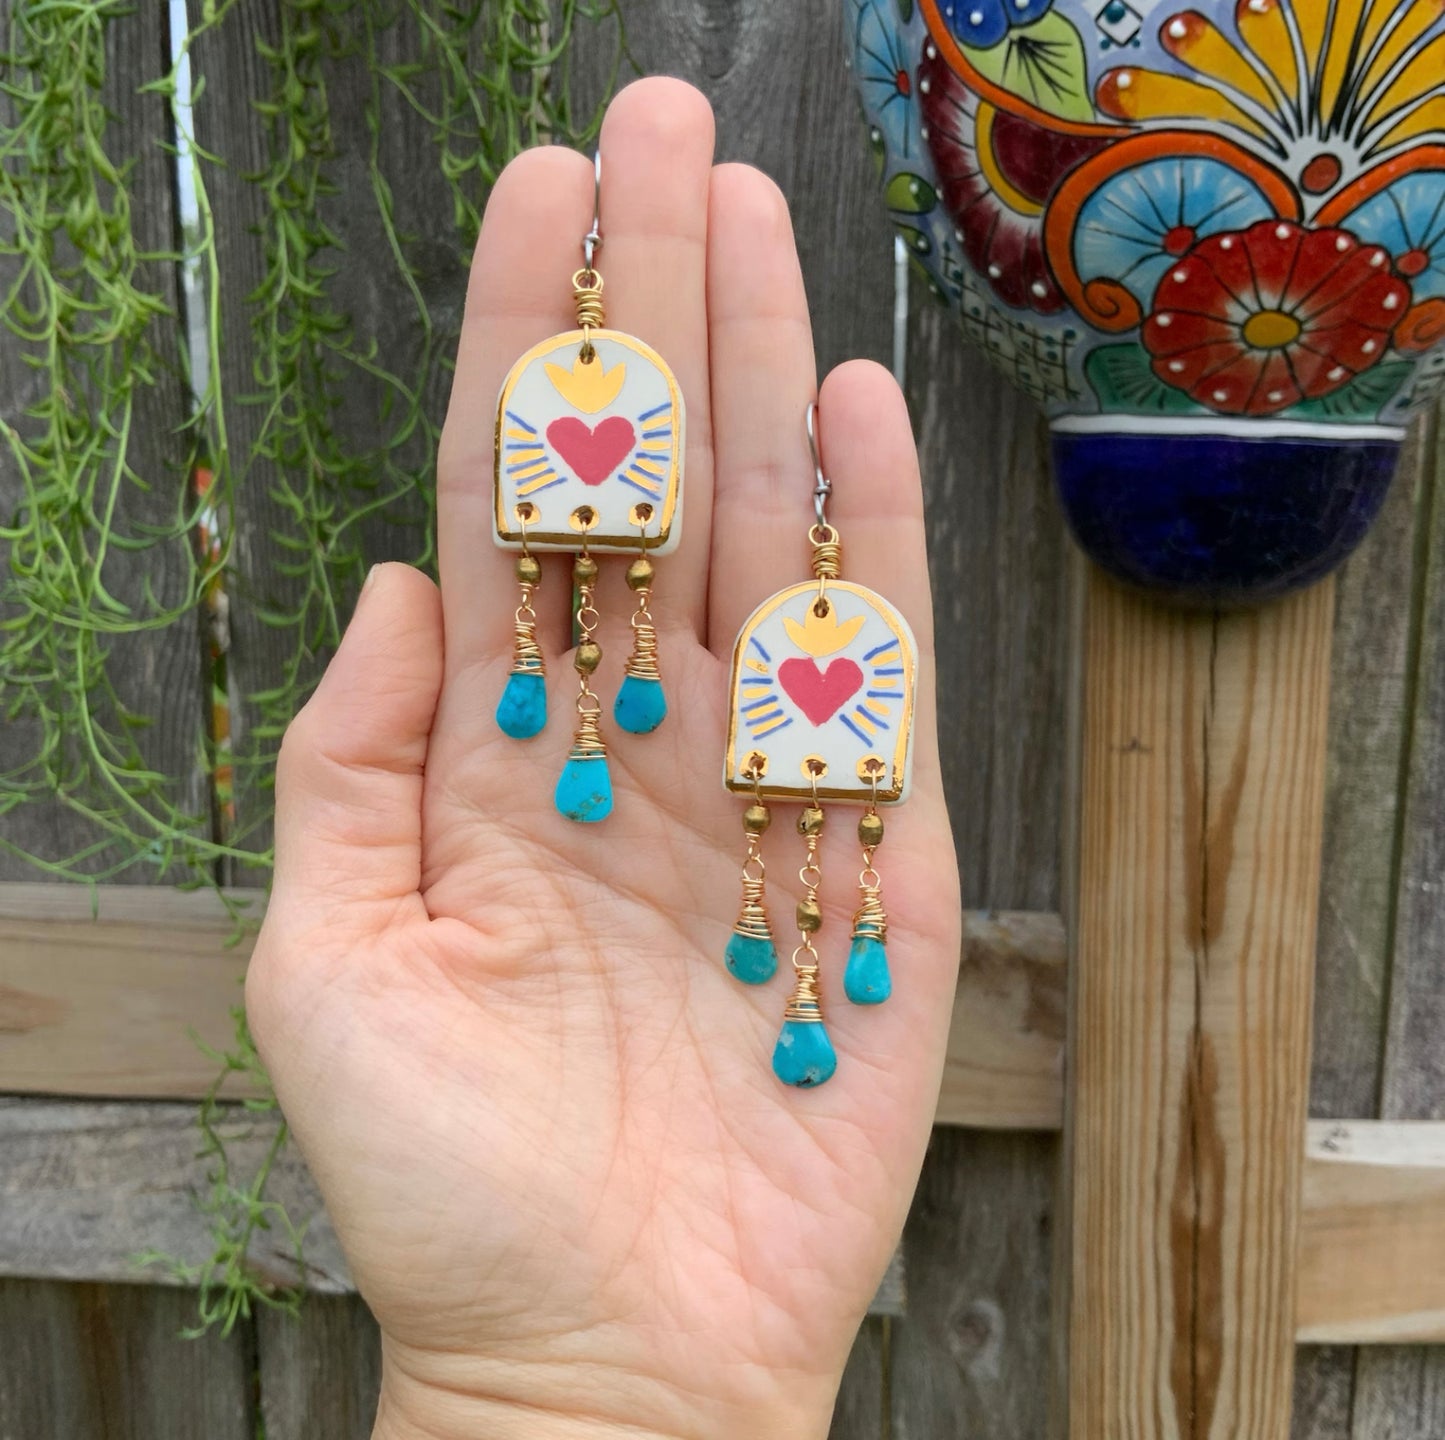 Ceramic milagros and genuine turquoise earrings